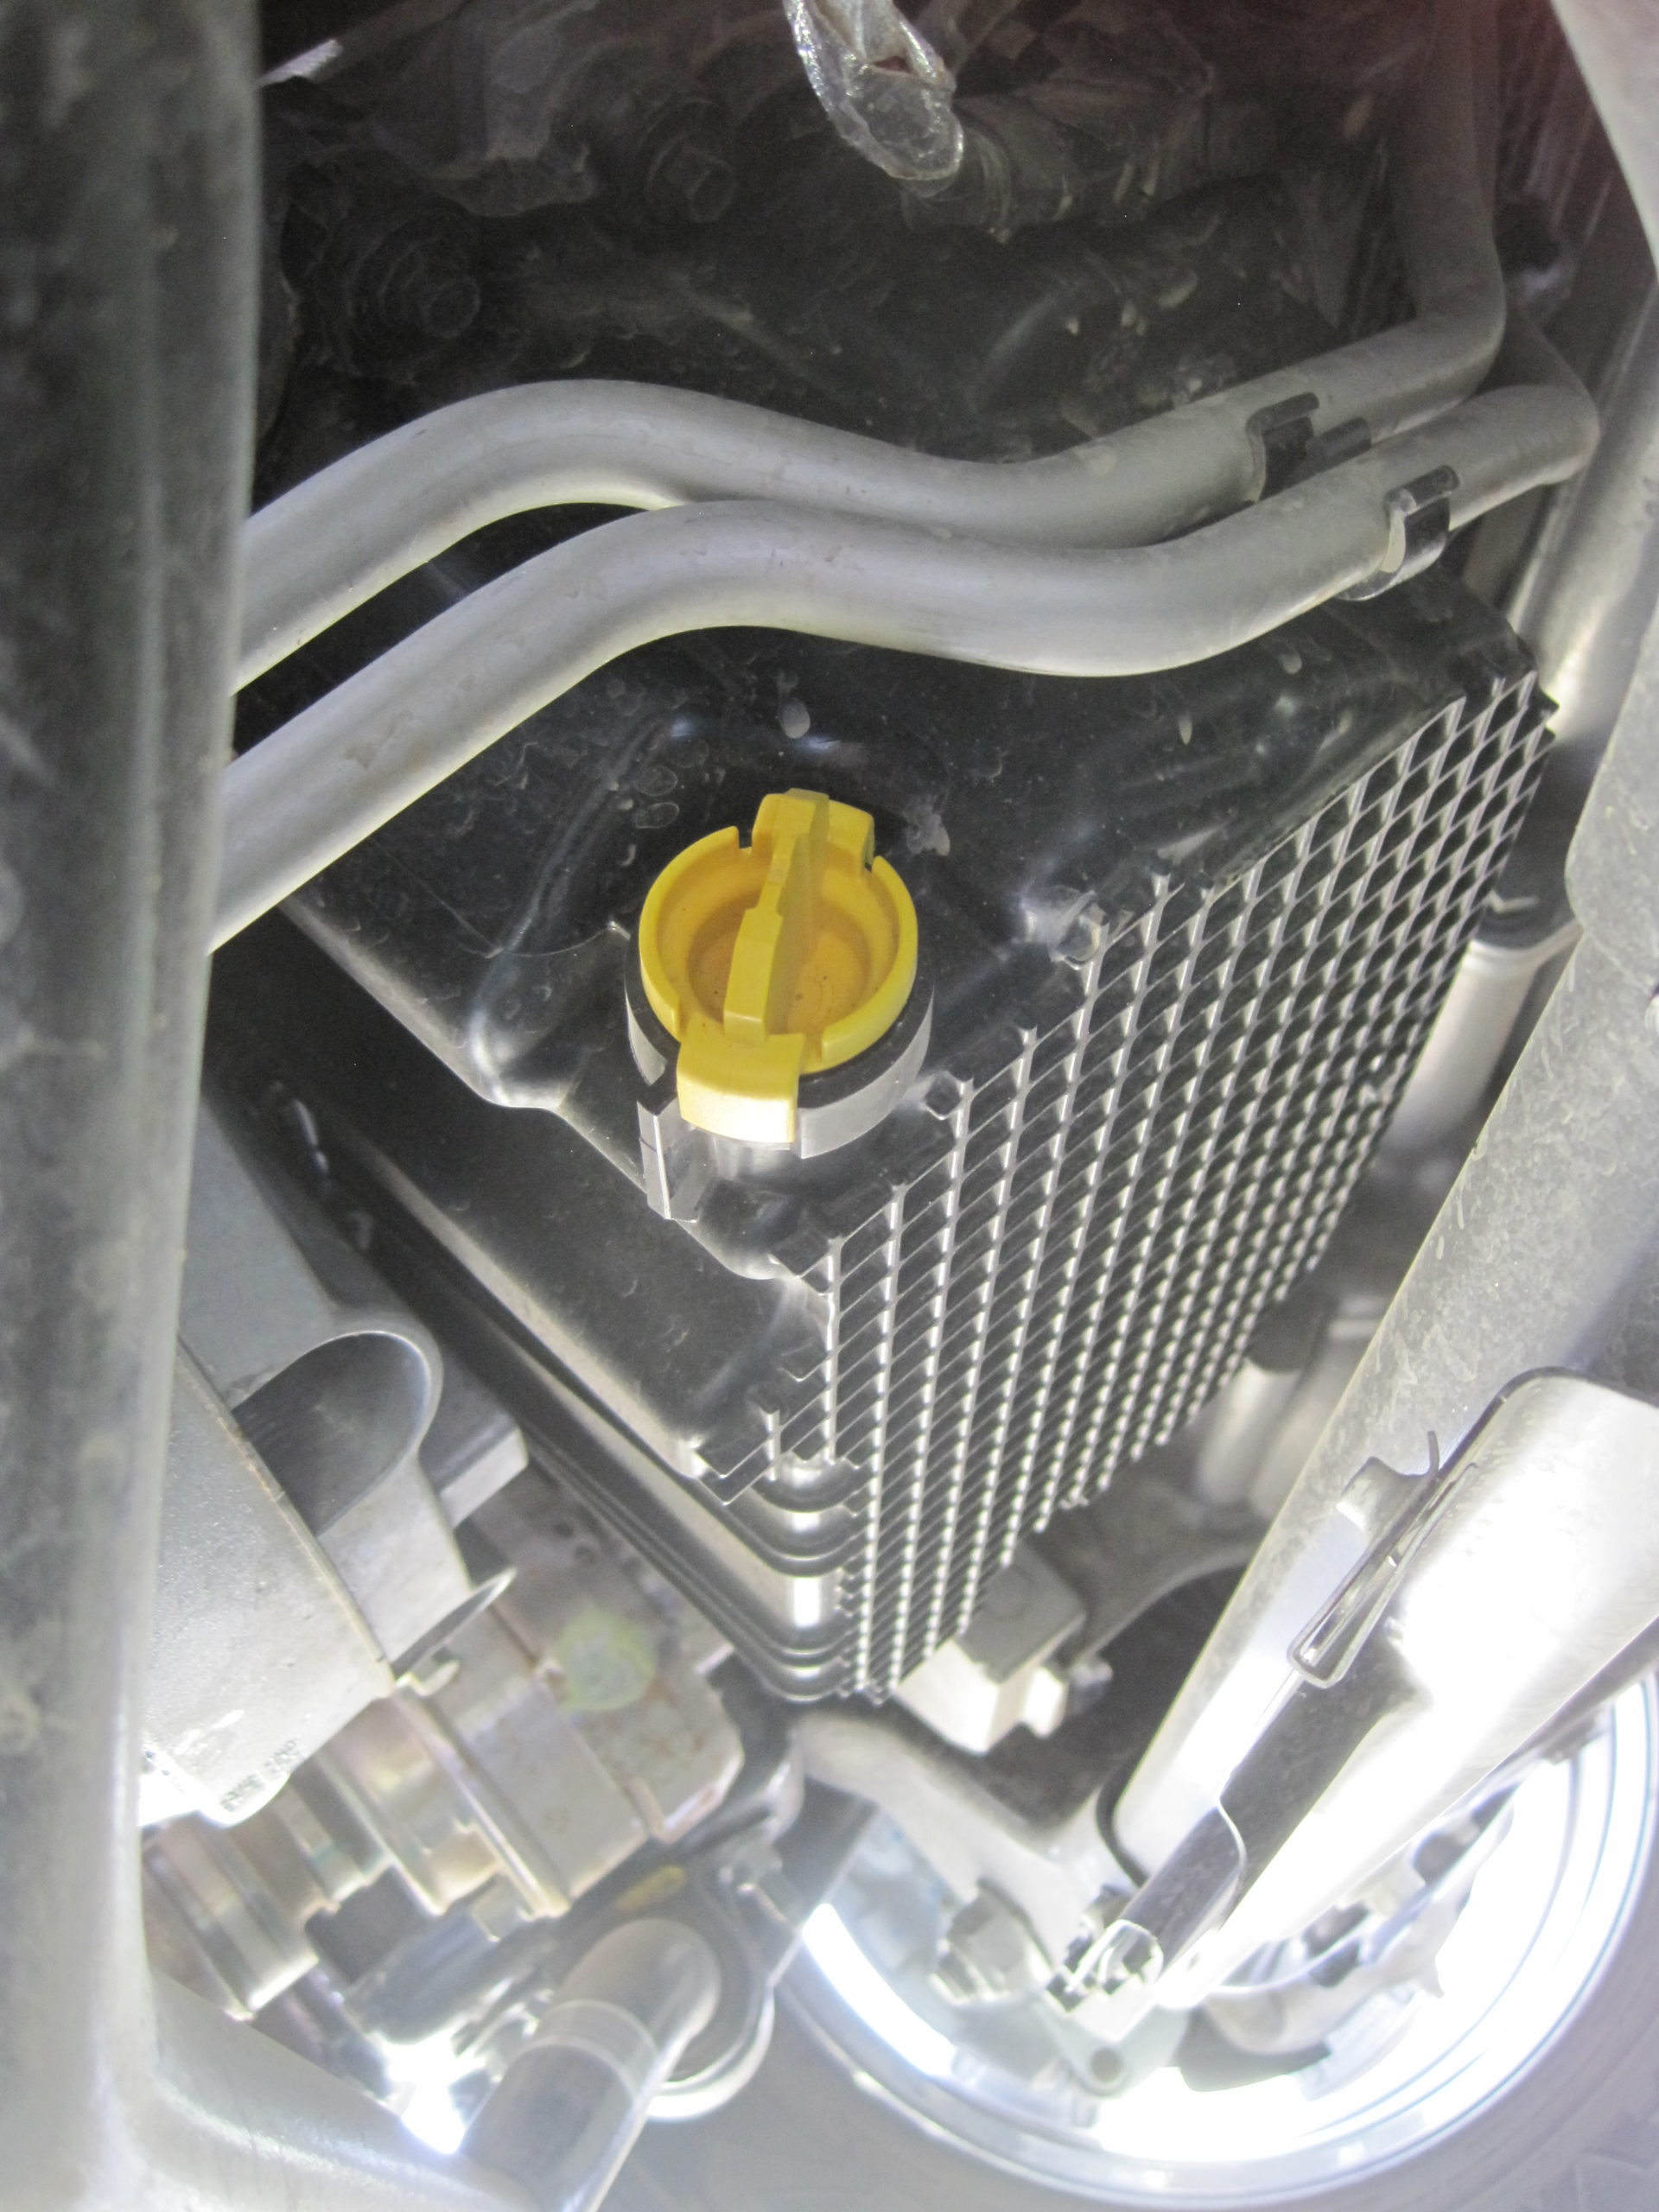 image shows plastic drain plug inserted into fords plastic oil pan for 2.7L ecoboost